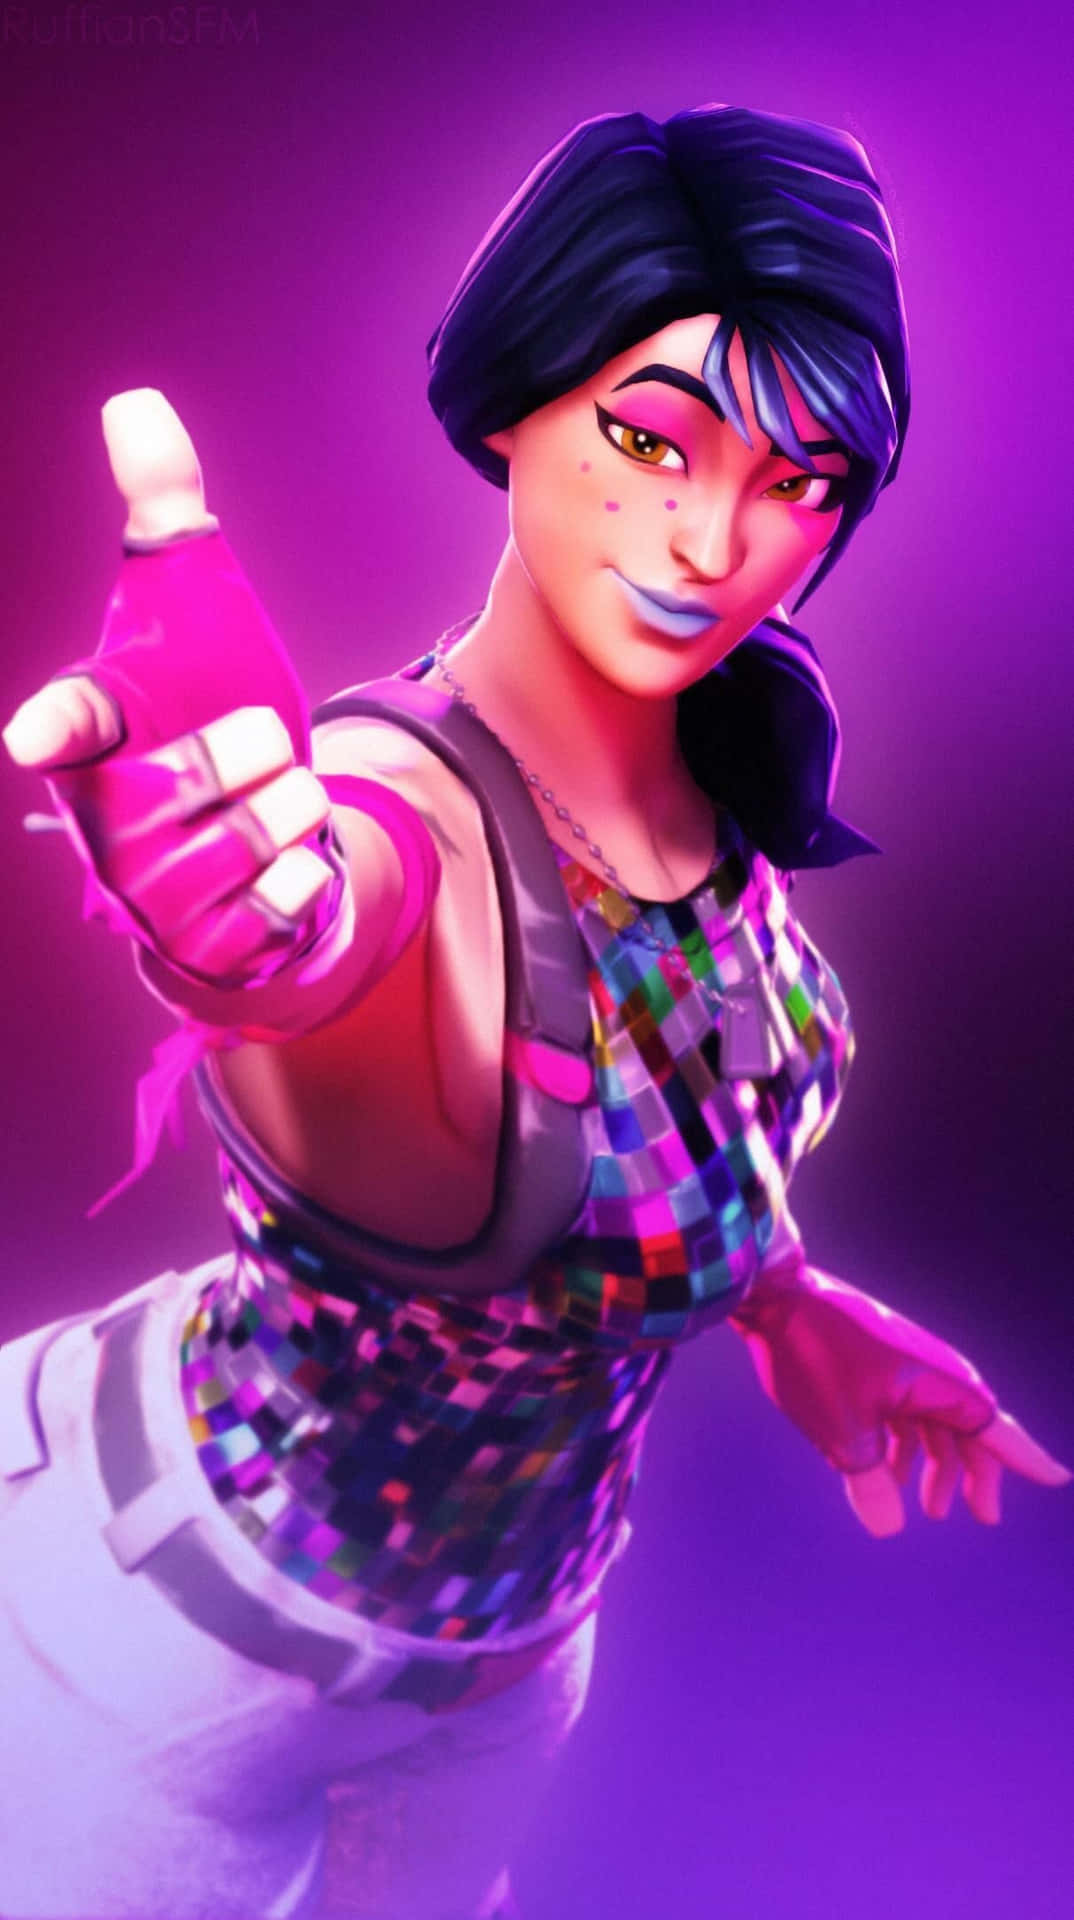 A cute Fortnite character ready to save the day! Wallpaper